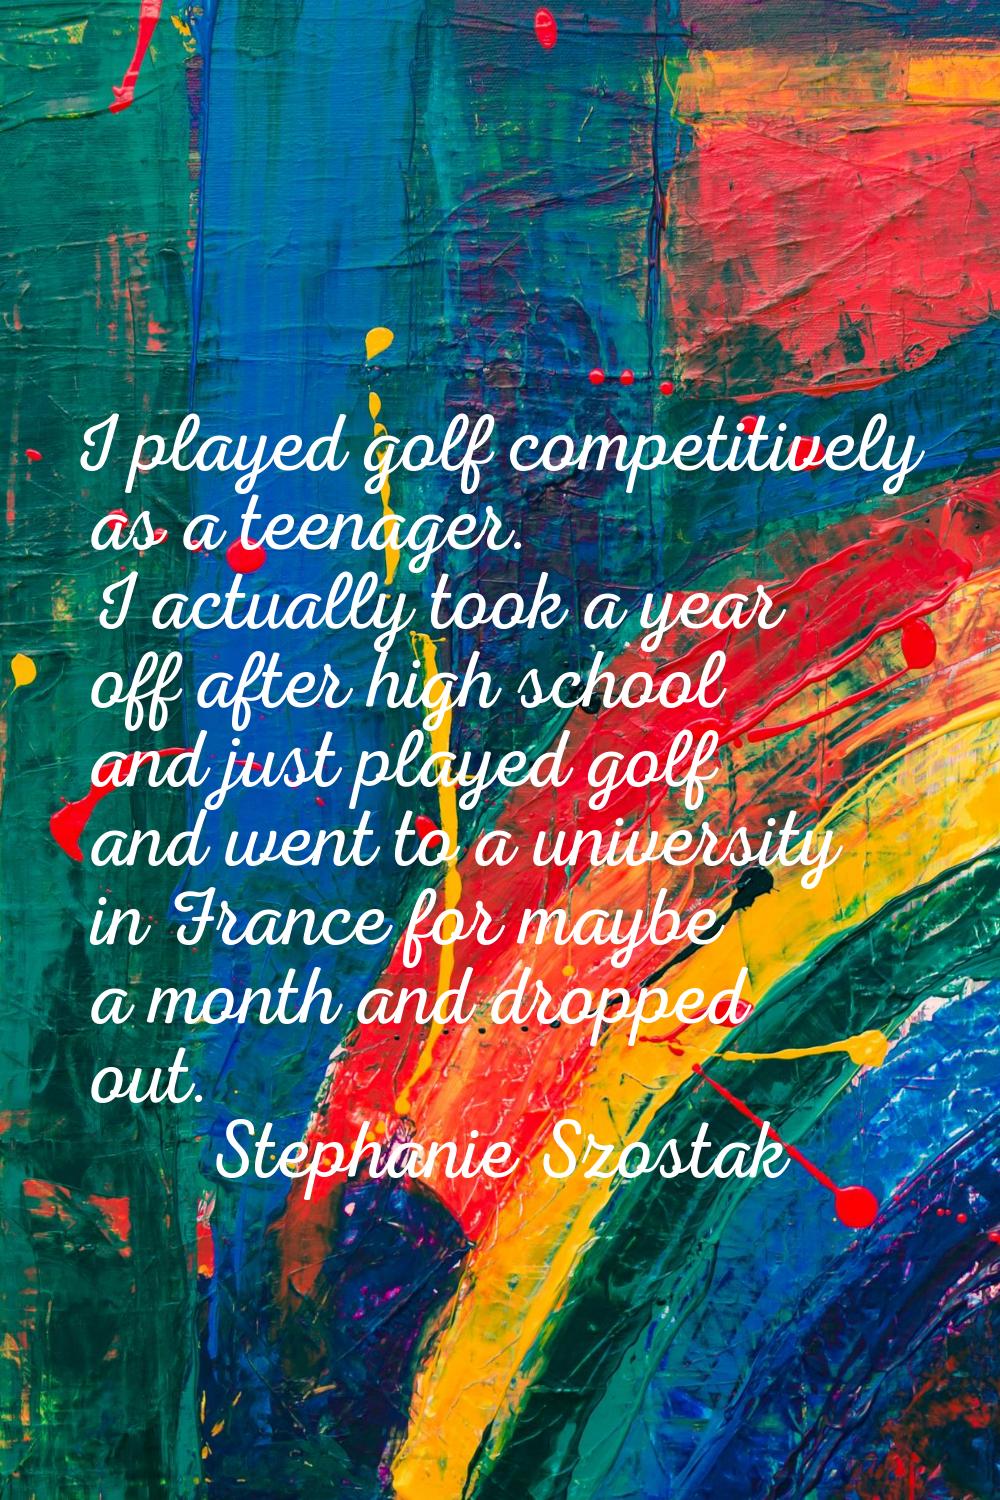 I played golf competitively as a teenager. I actually took a year off after high school and just pl